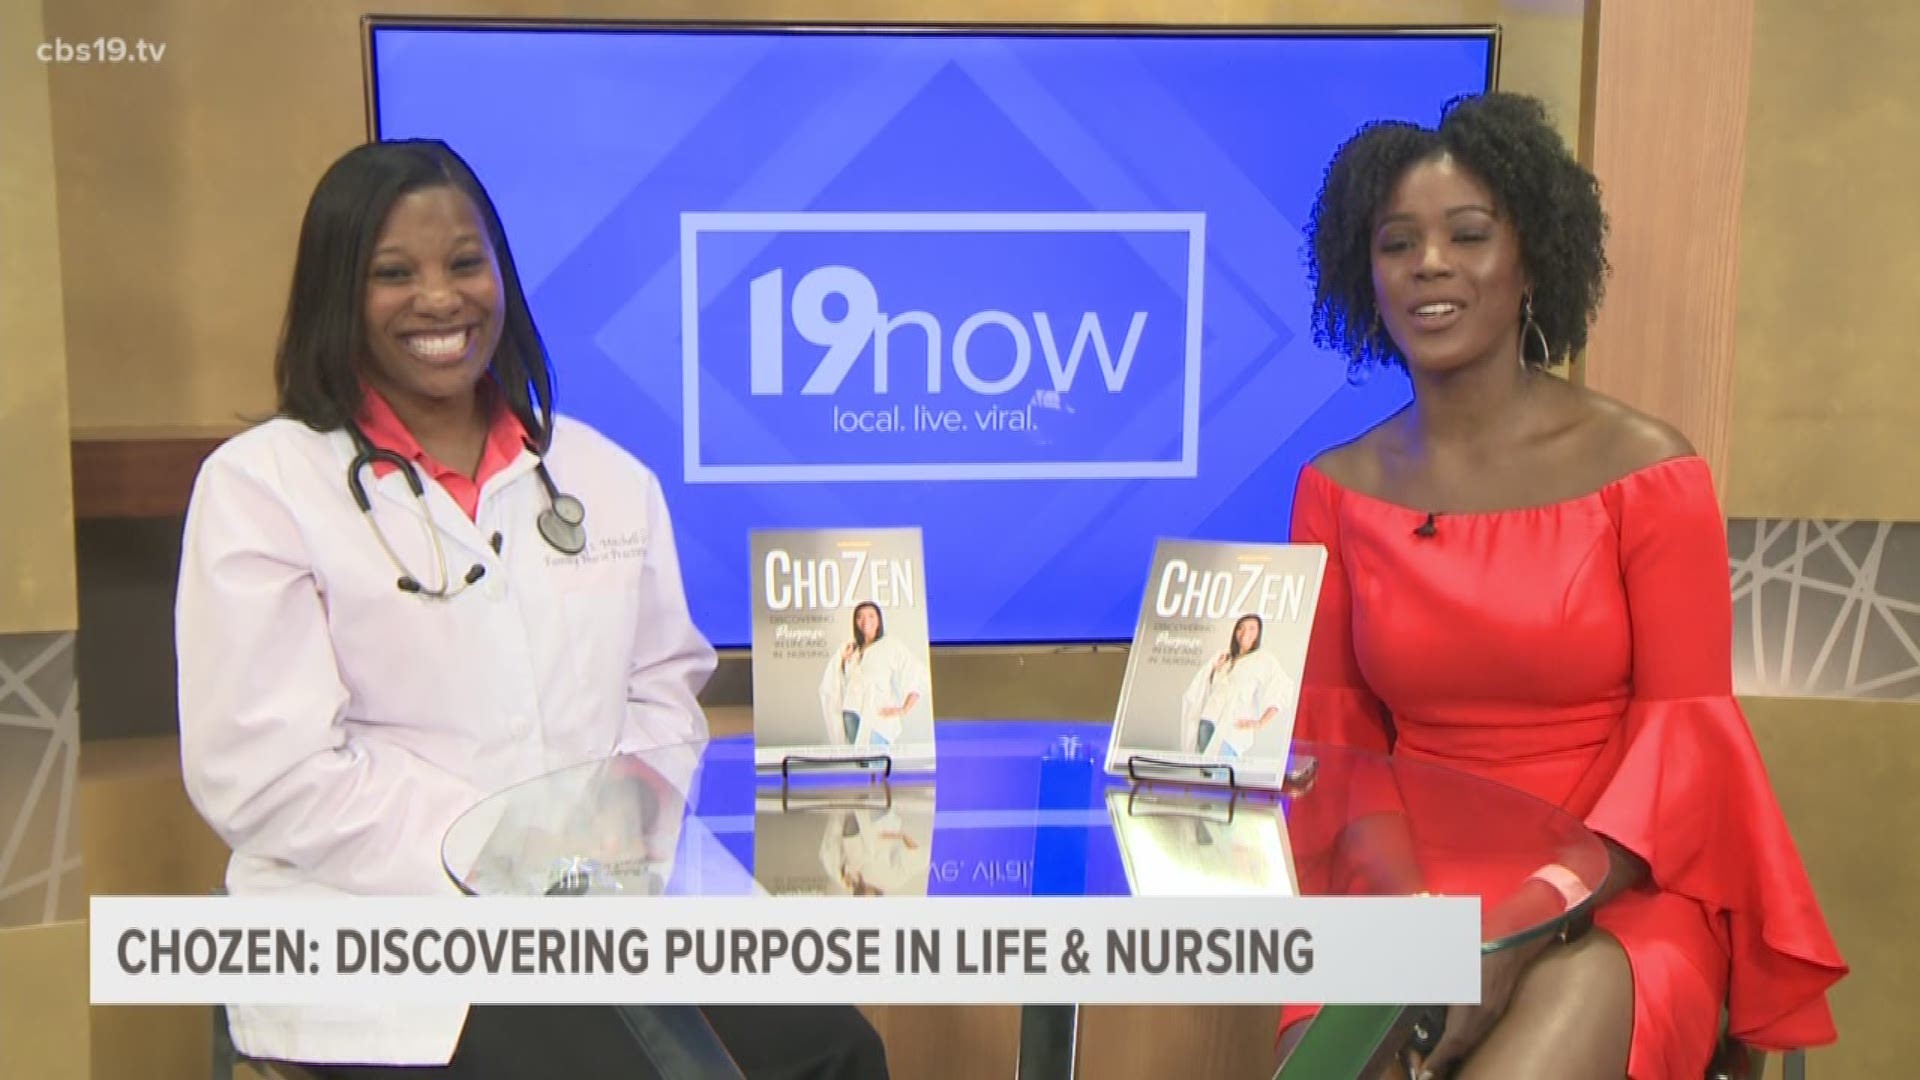 The book is titled Chozen: Discovering Purpose in Life & Nursing.